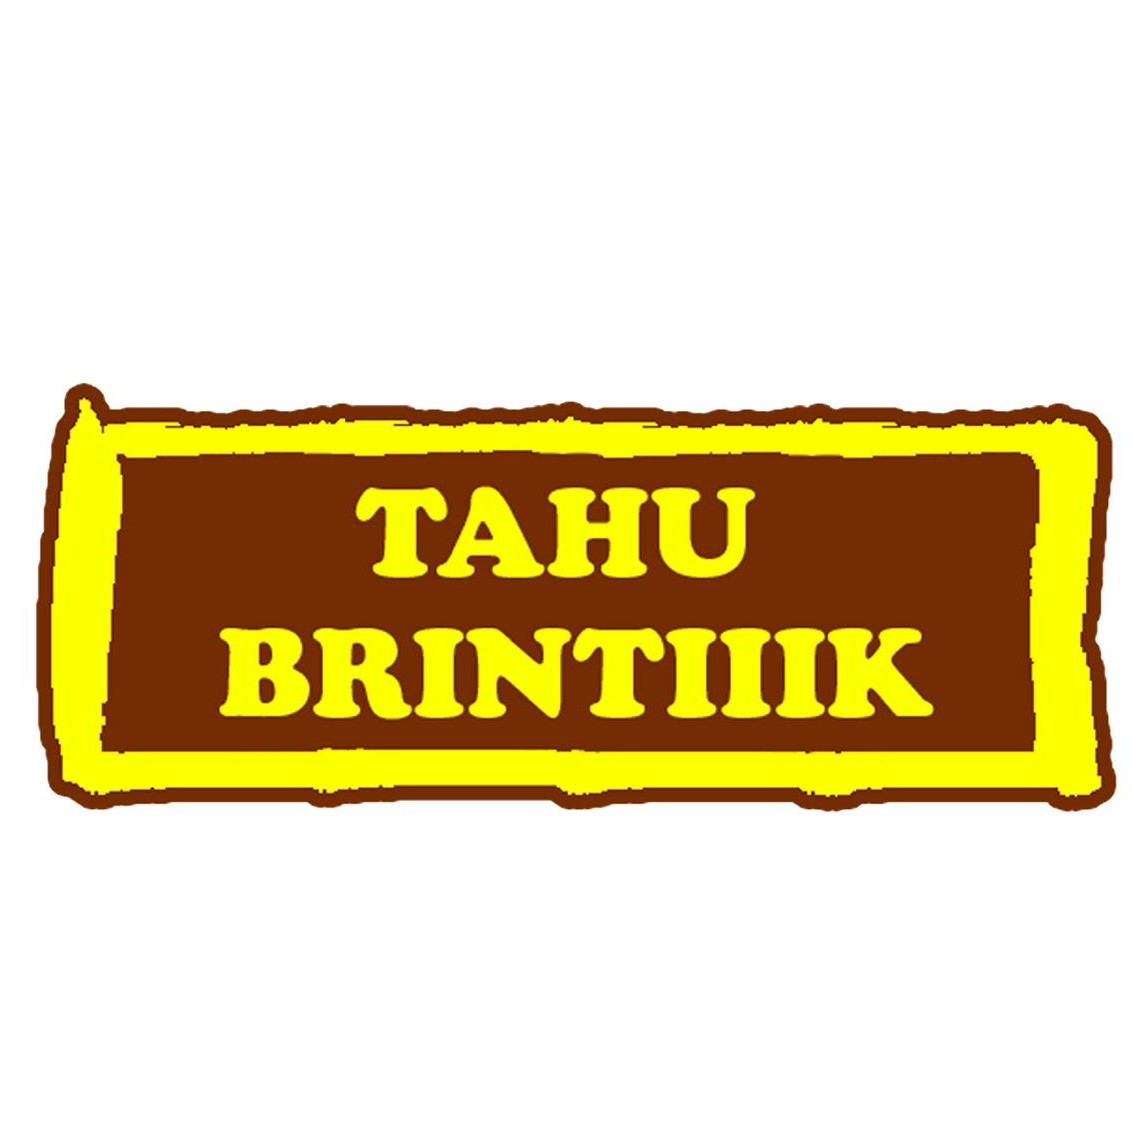 You are currently viewing TAHU BRINTIK